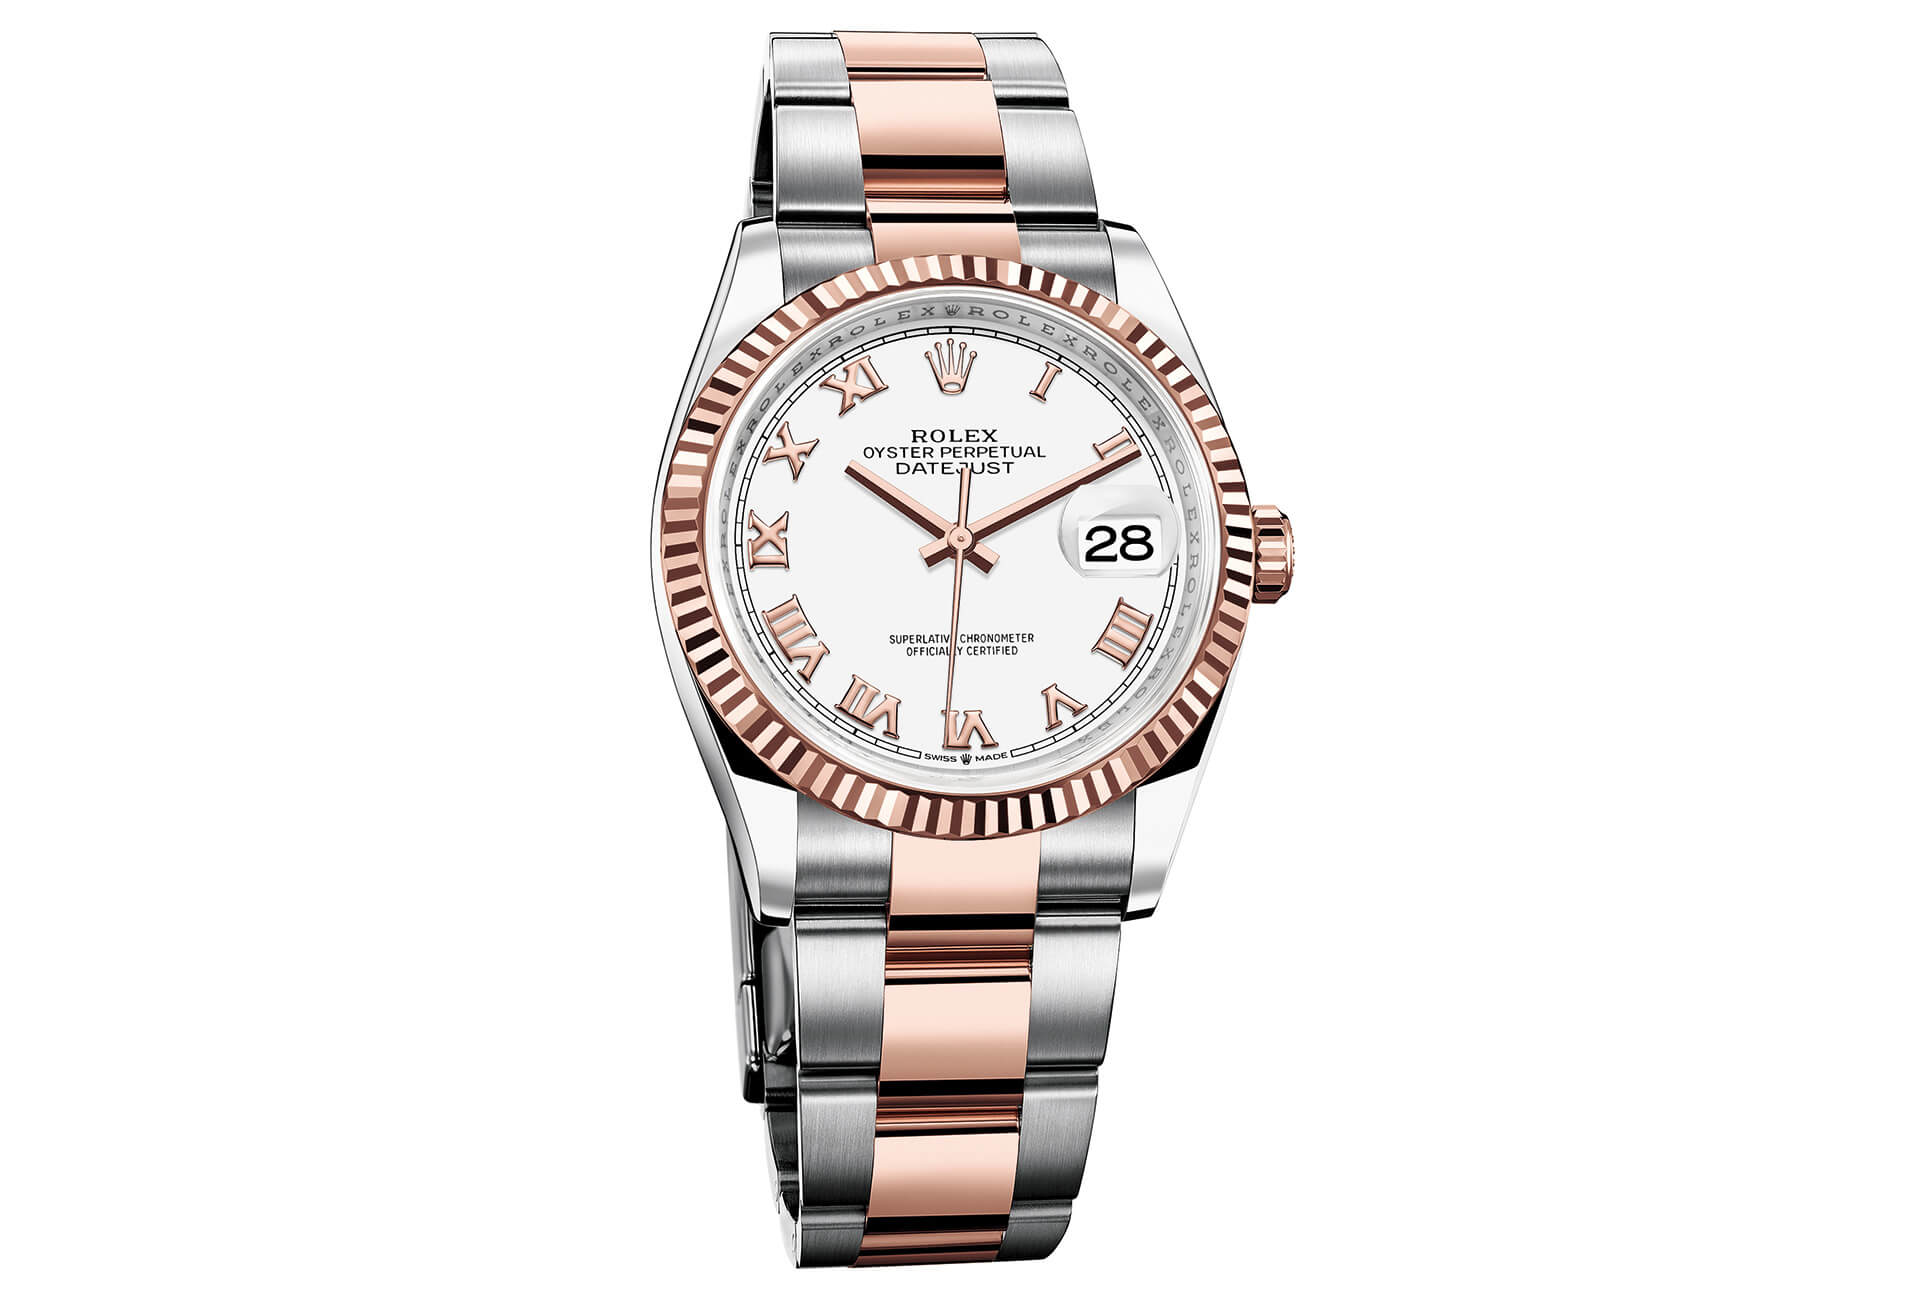 Rolex Oyster Perpetual Datejust 36 